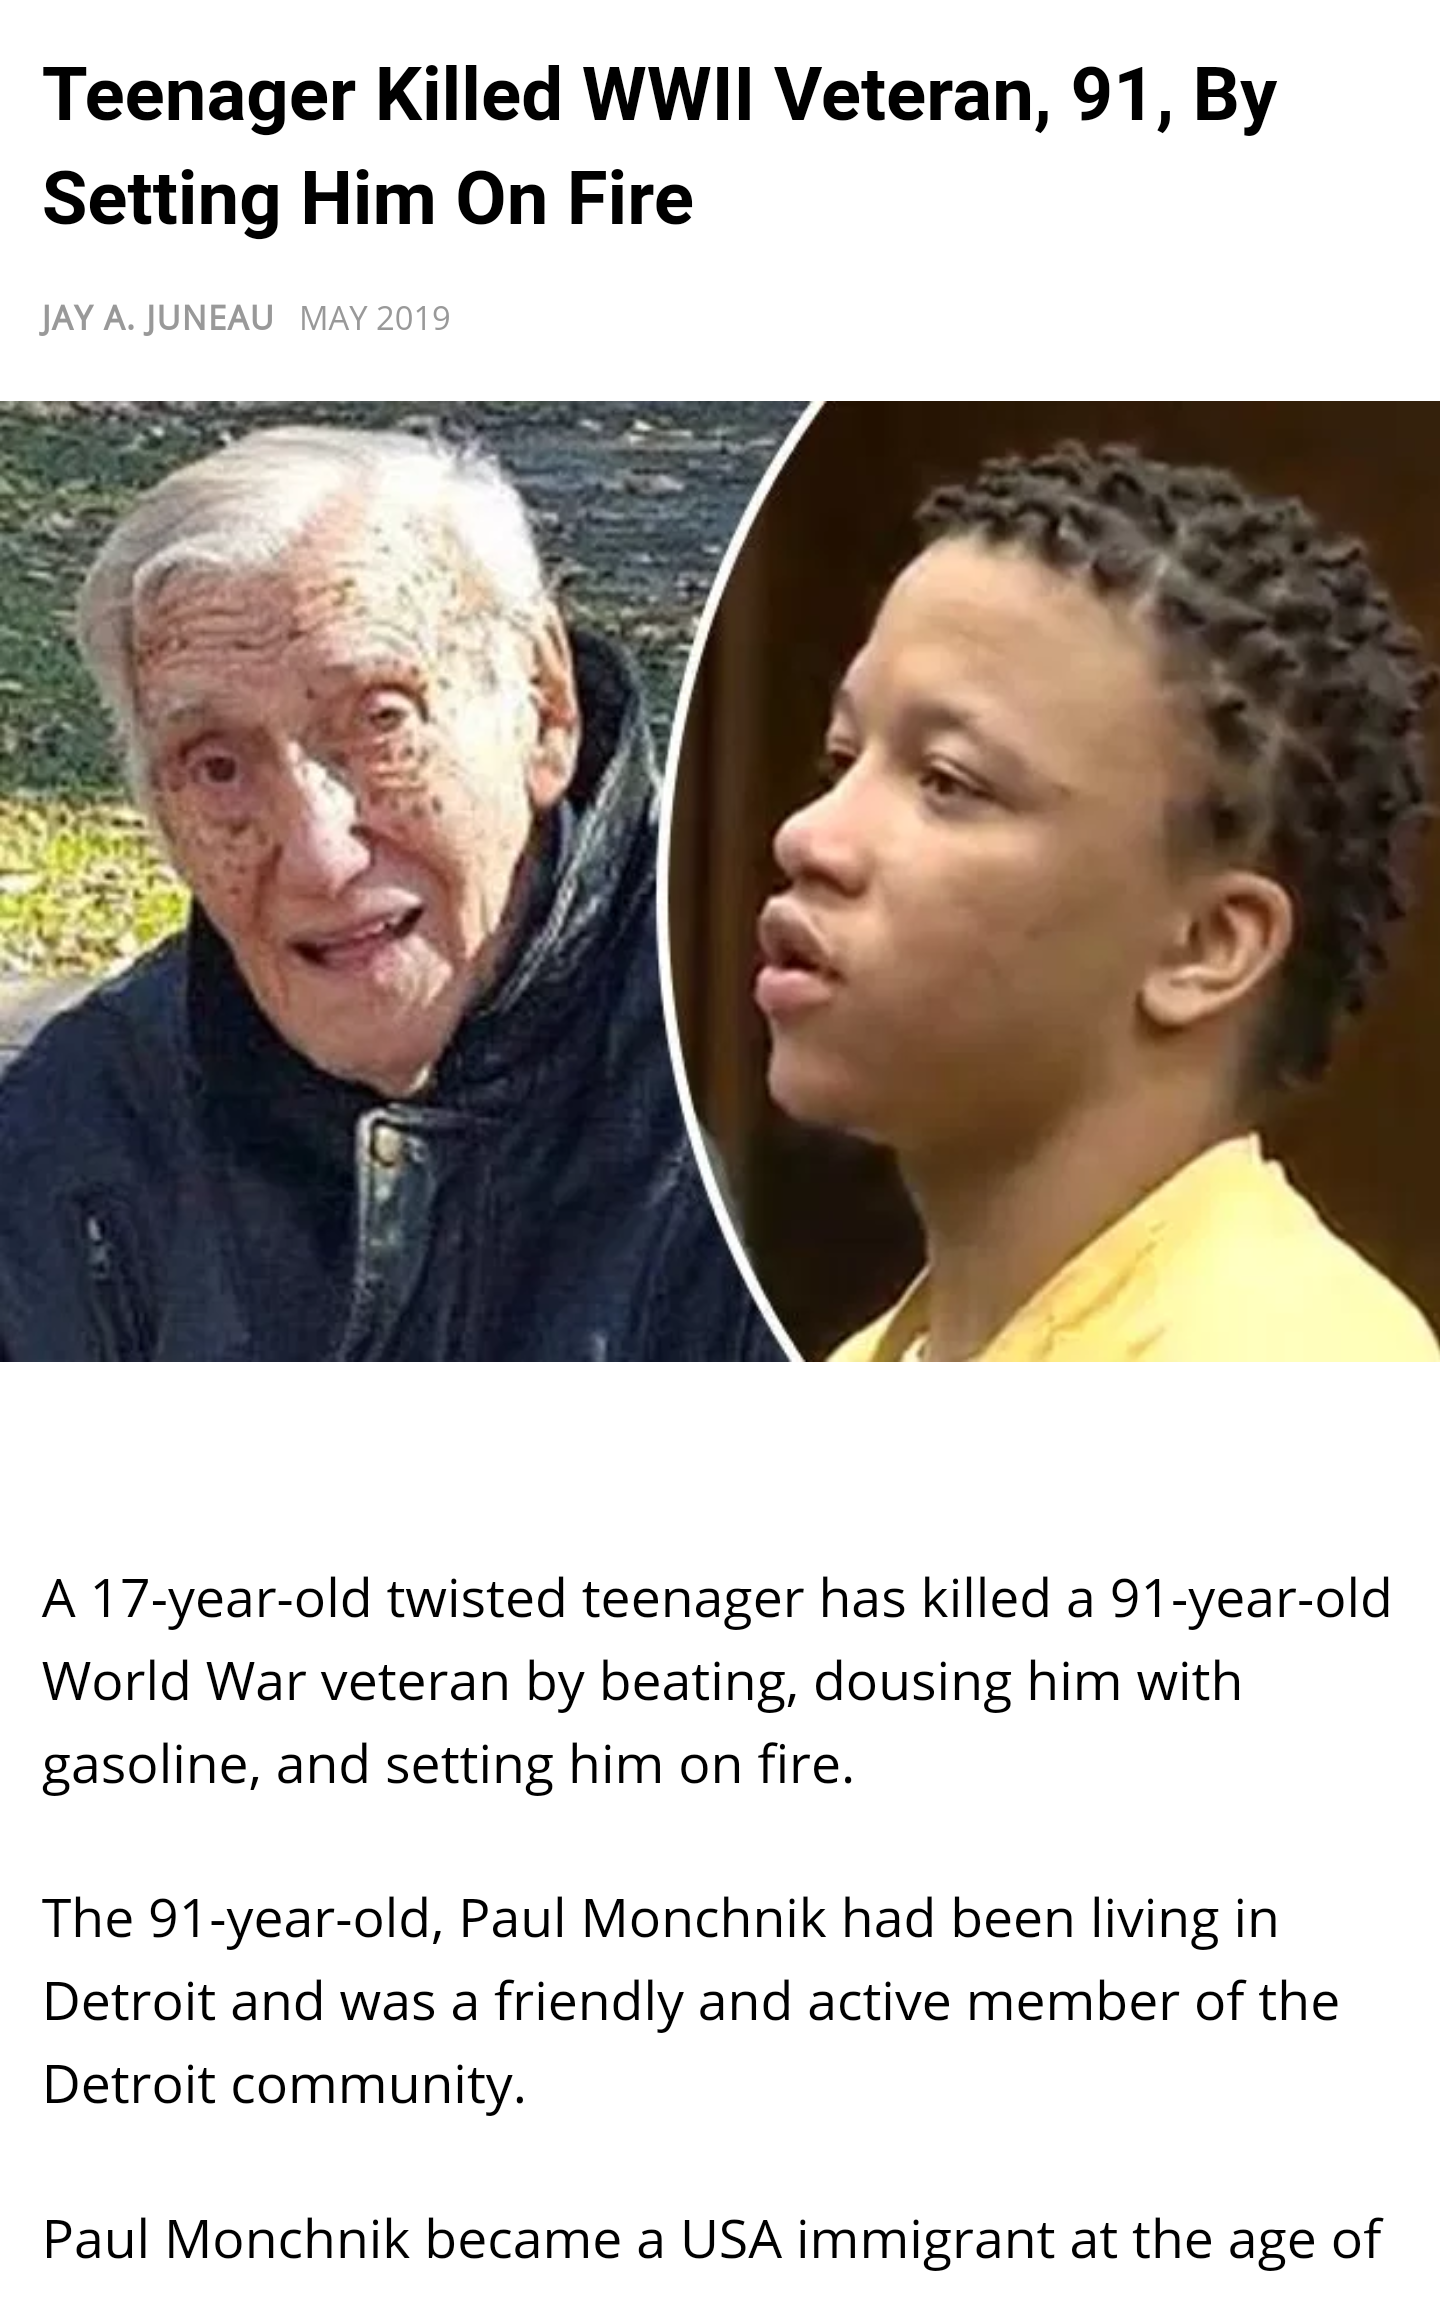 ww2 veteran set on fire - Teenager Killed Wwii Veteran, 91, By Setting Him On Fire Jaya.Juneau A 17yearold twisted teenager has killed a 91yearold World War veteran by beating, dousing him with gasoline, and setting him on fire. The 91yearold, Paul Monchn